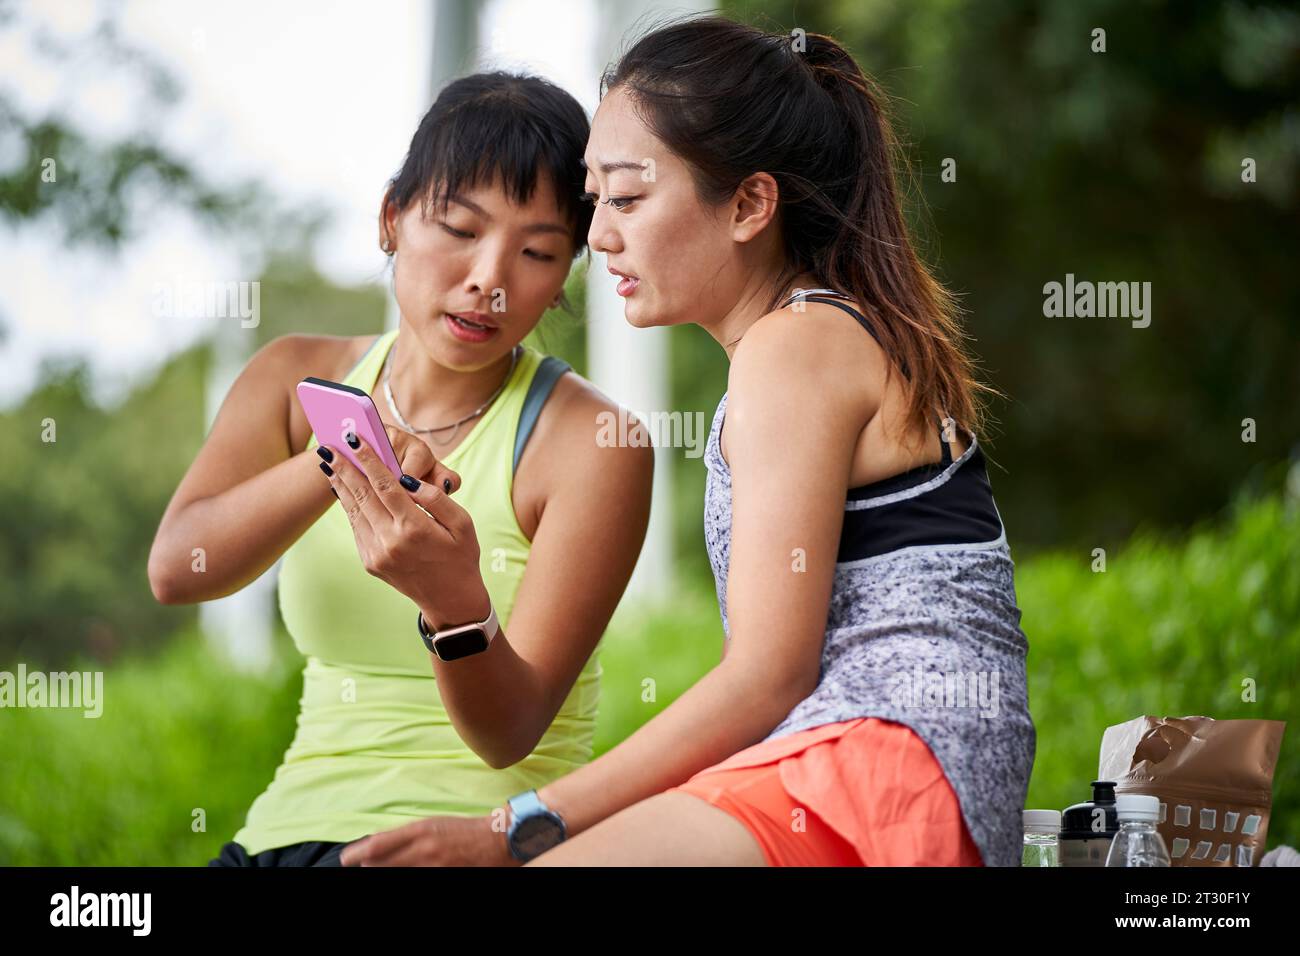 two young asian women female friends in sportswear relaxing chatting sharing cellphone photos outdoors Stock Photo